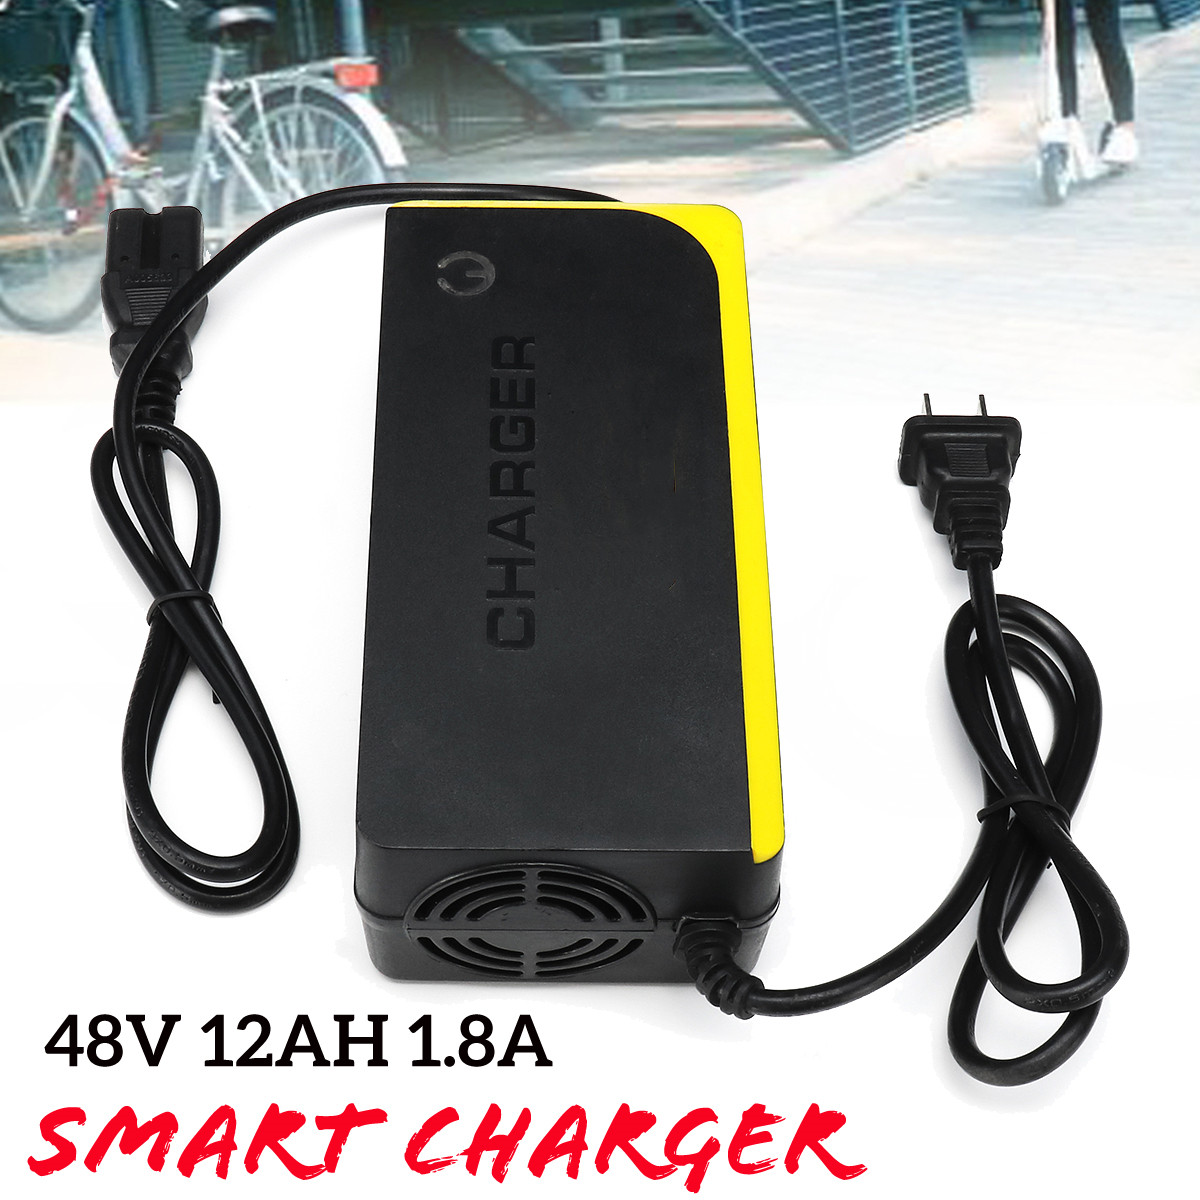 48V-12AH-Electric-Vehicle-Battery-Charger-Lead-Acid-Battery-Charger-Bicycle-Motorcycle-Charger-1400891-2